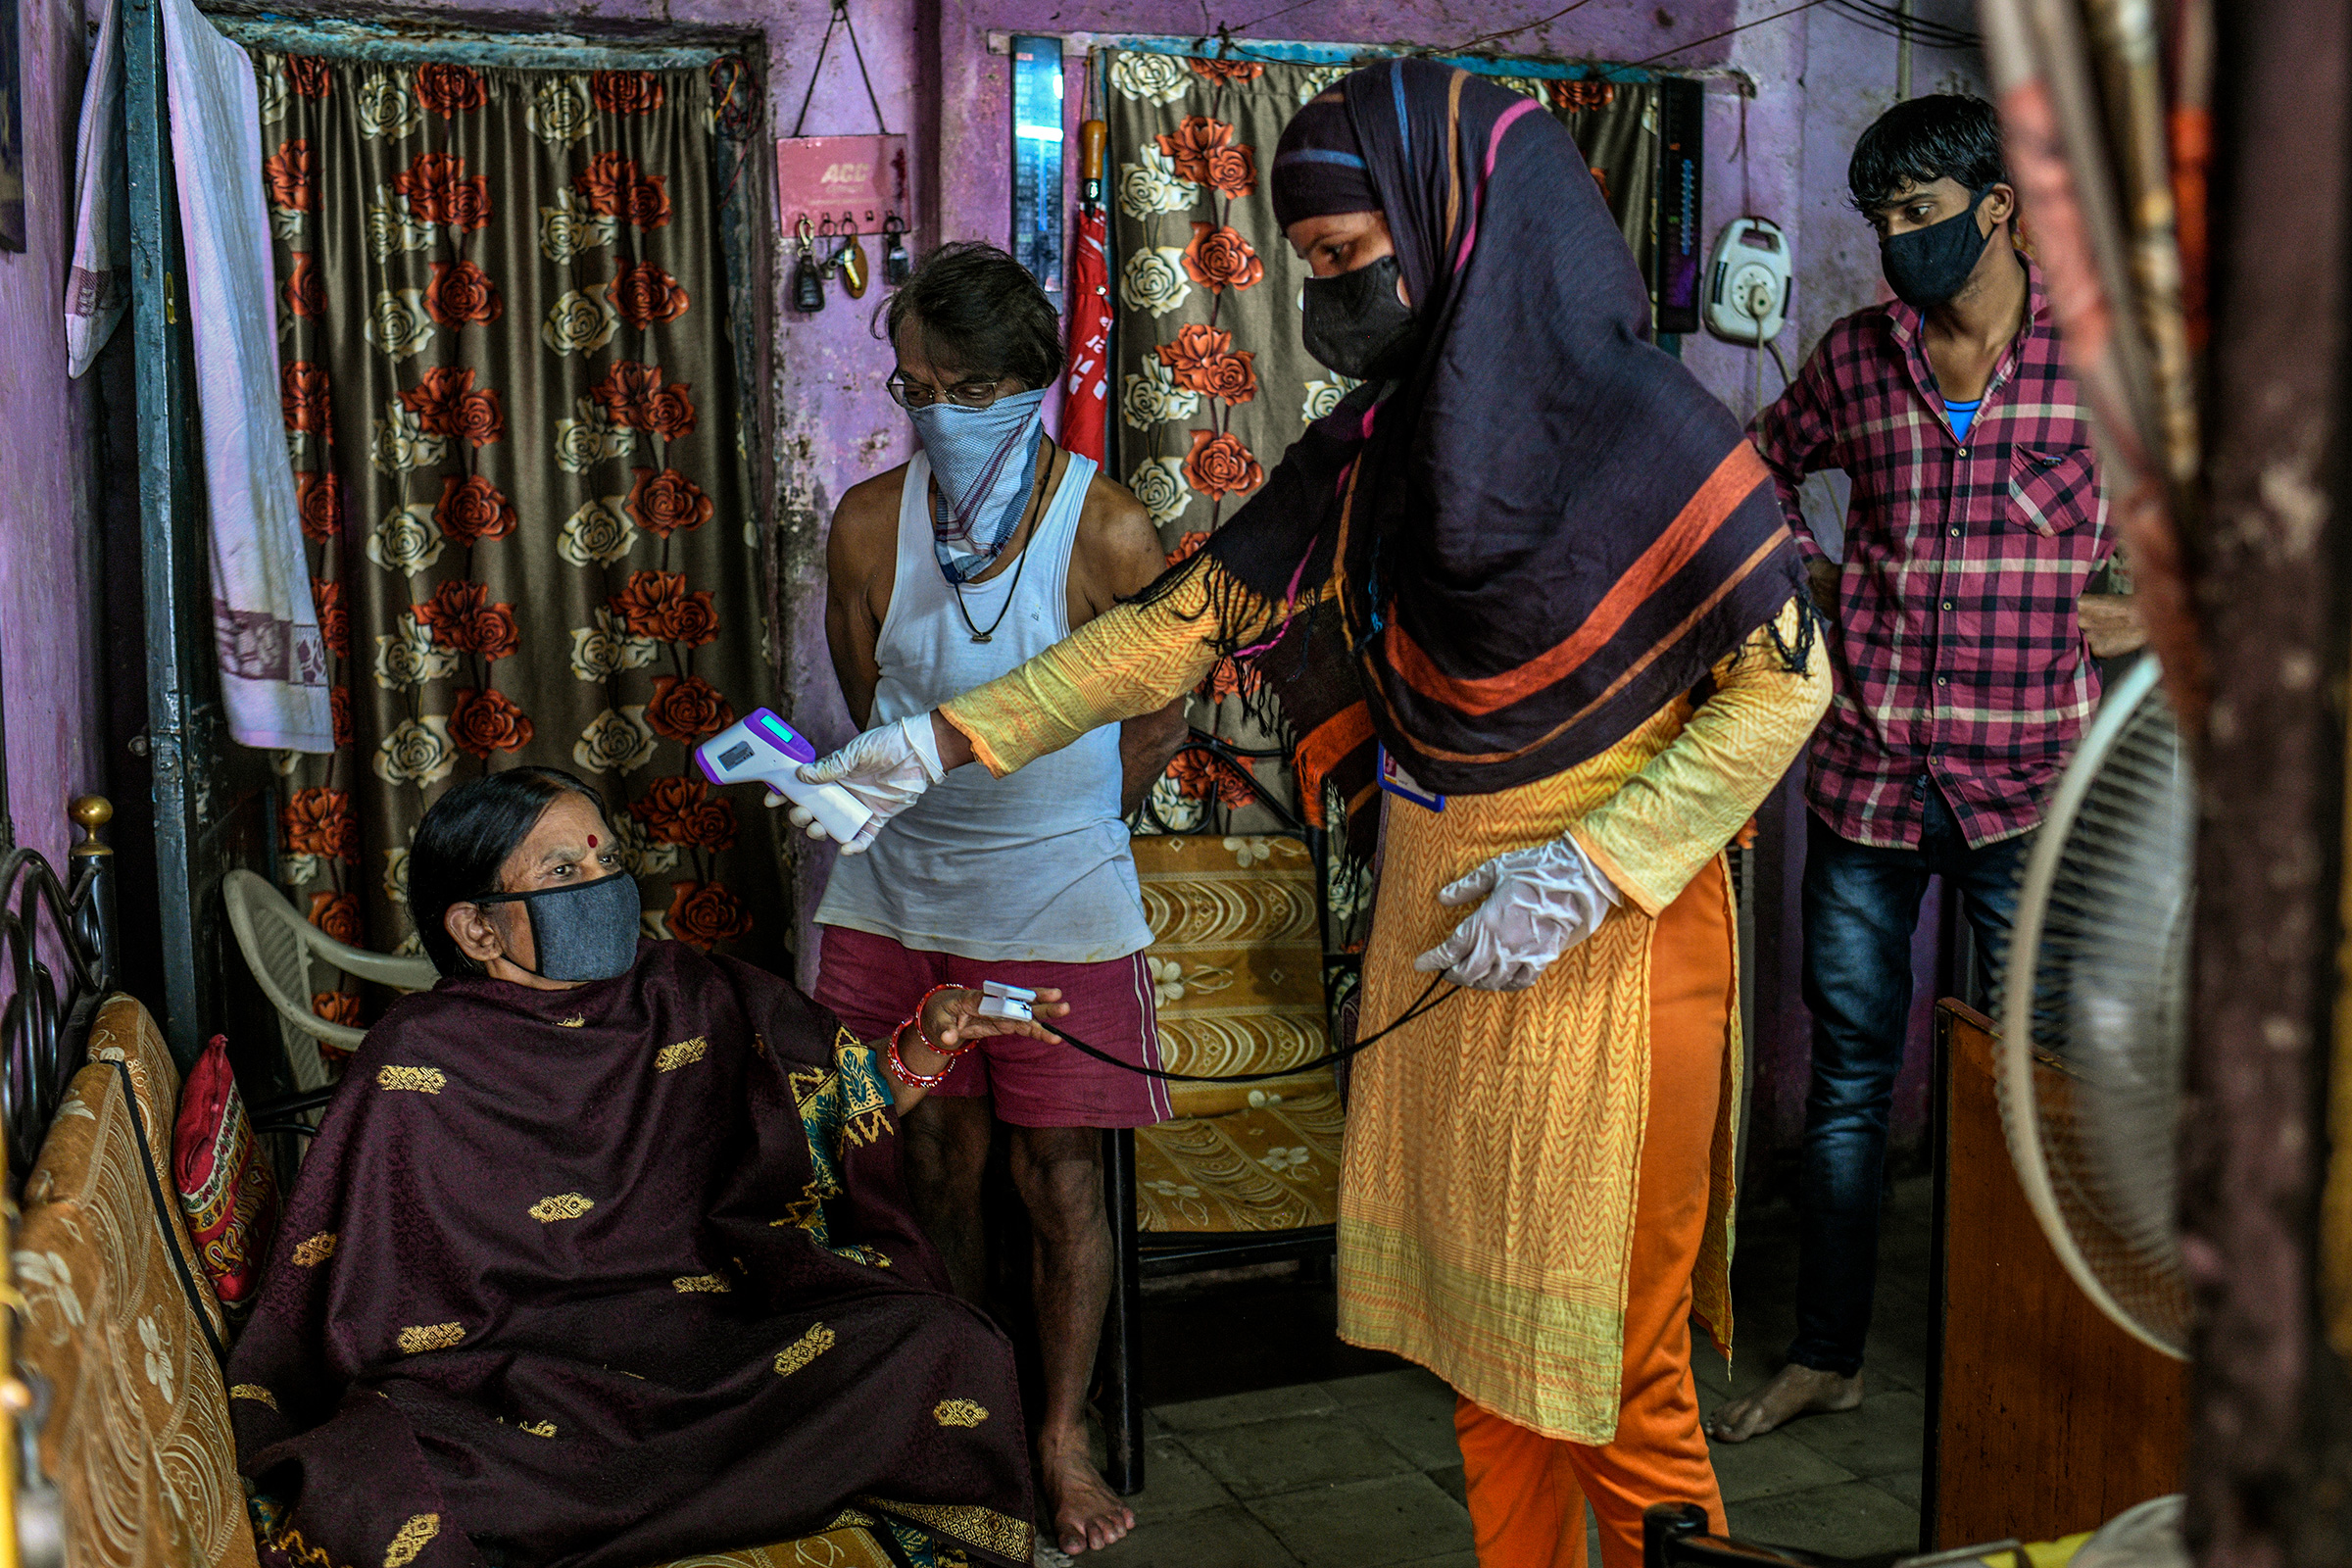 A health care worker checks a woman's temperature and oxygen saturation in the Dhole Patil slum in Pune on Aug. 10.